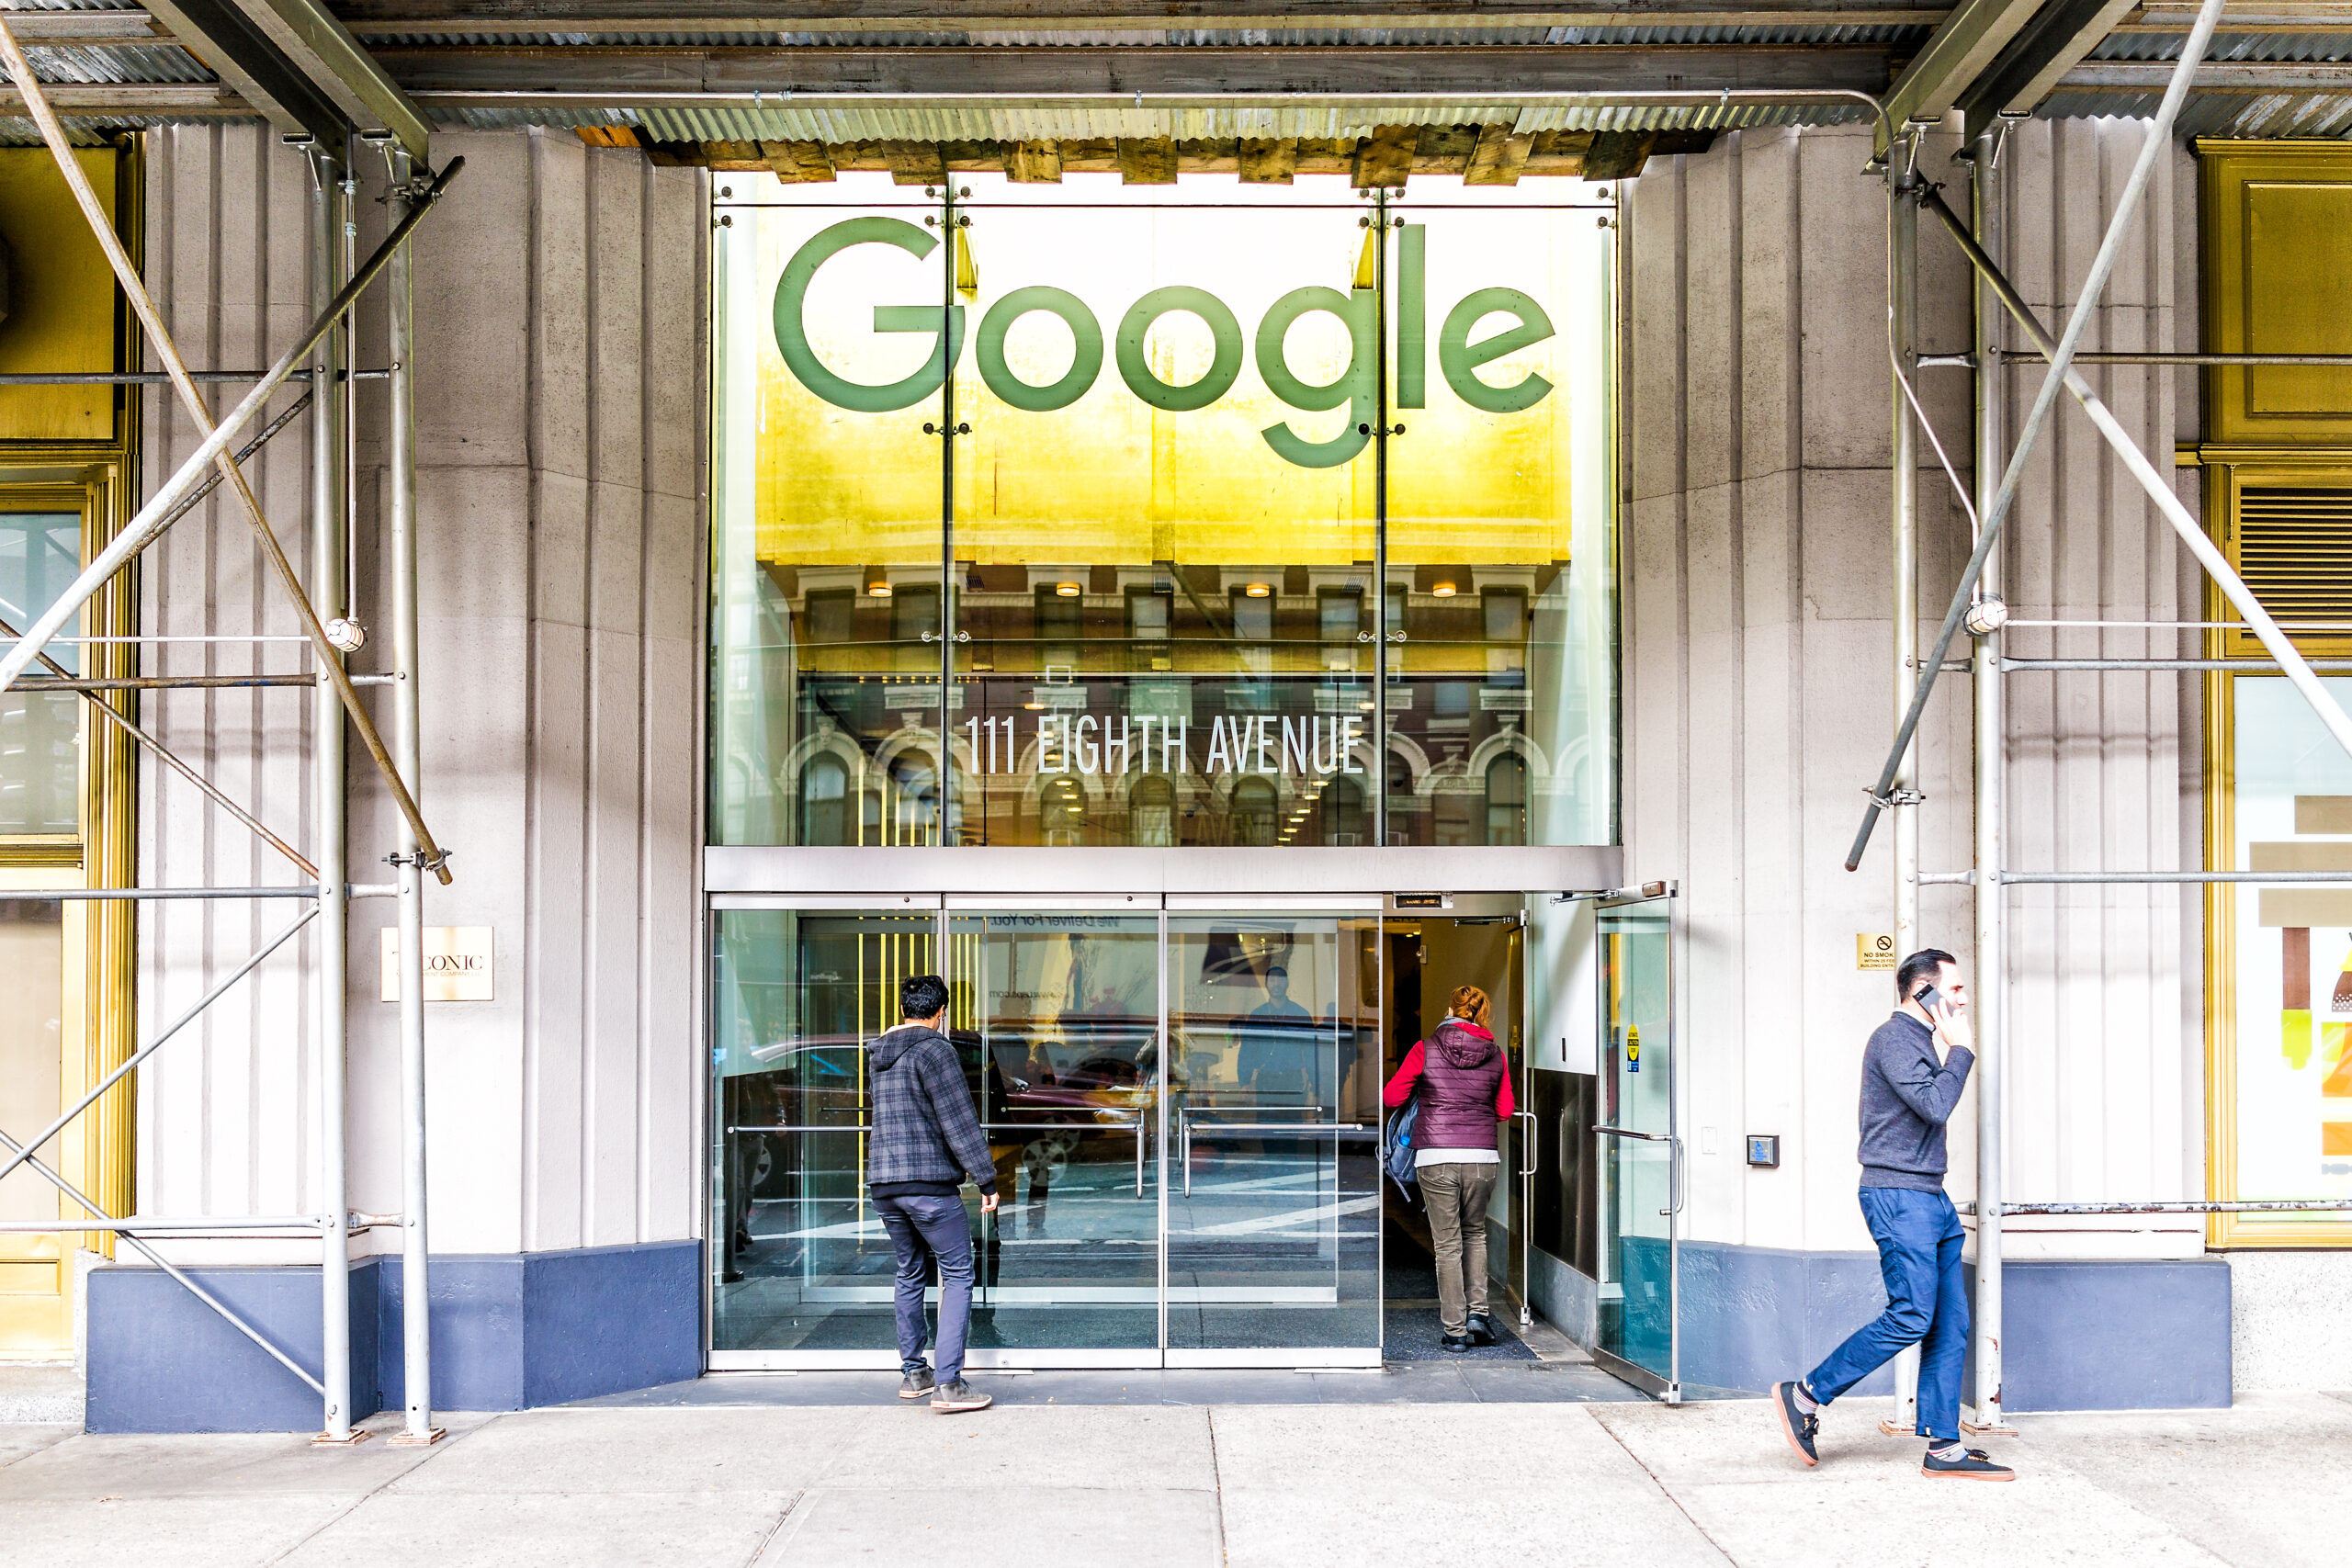 New York City, USA - October 30, 2017: Google company office green sign in downtown lower Chelsea neighborhood district Manhattan NYC, people entering, exiting doors entrance